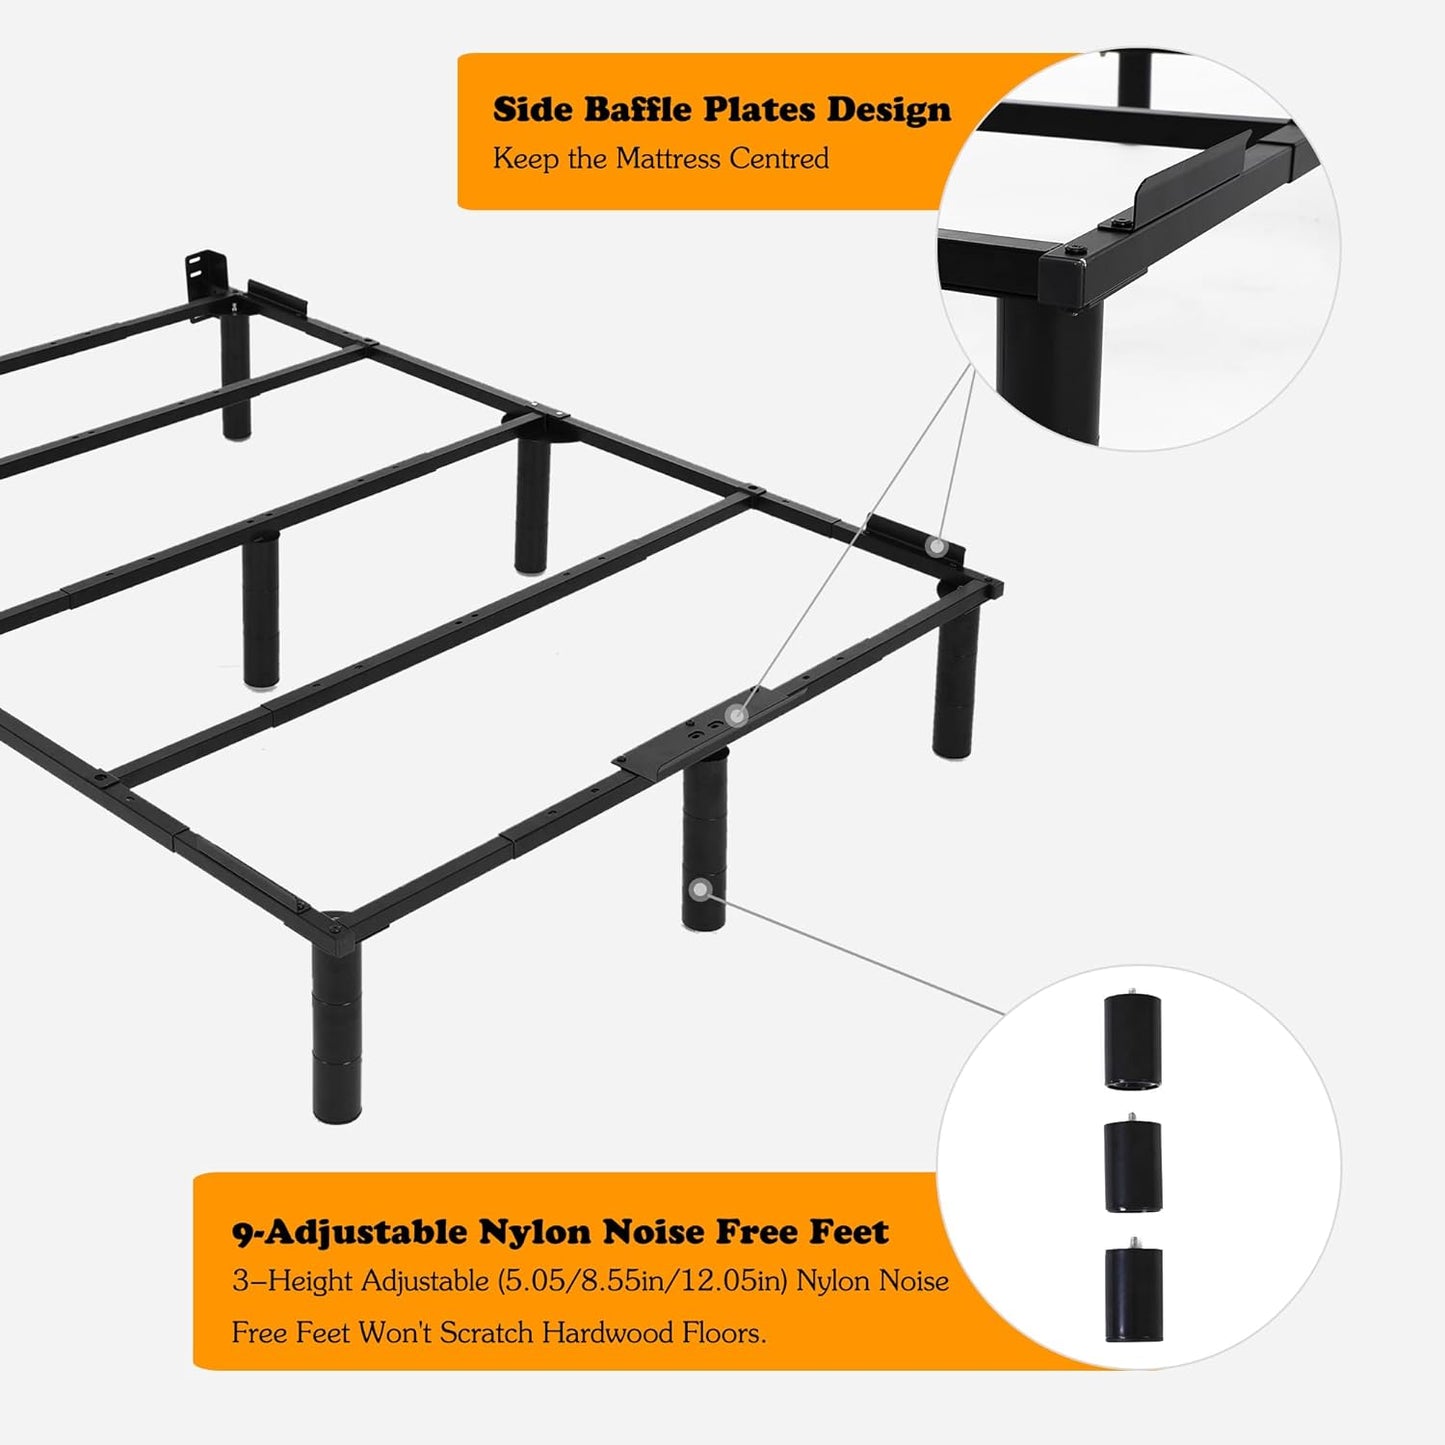 S*MAX Queen Platform Bed Frame Reinforced Heavy Duty Steel Metal Bed Frame 3 Heights Adjustable Nylon Noise Free Feet Retractable with TXL Full Queen Black Bed Frame Size 3 in 1